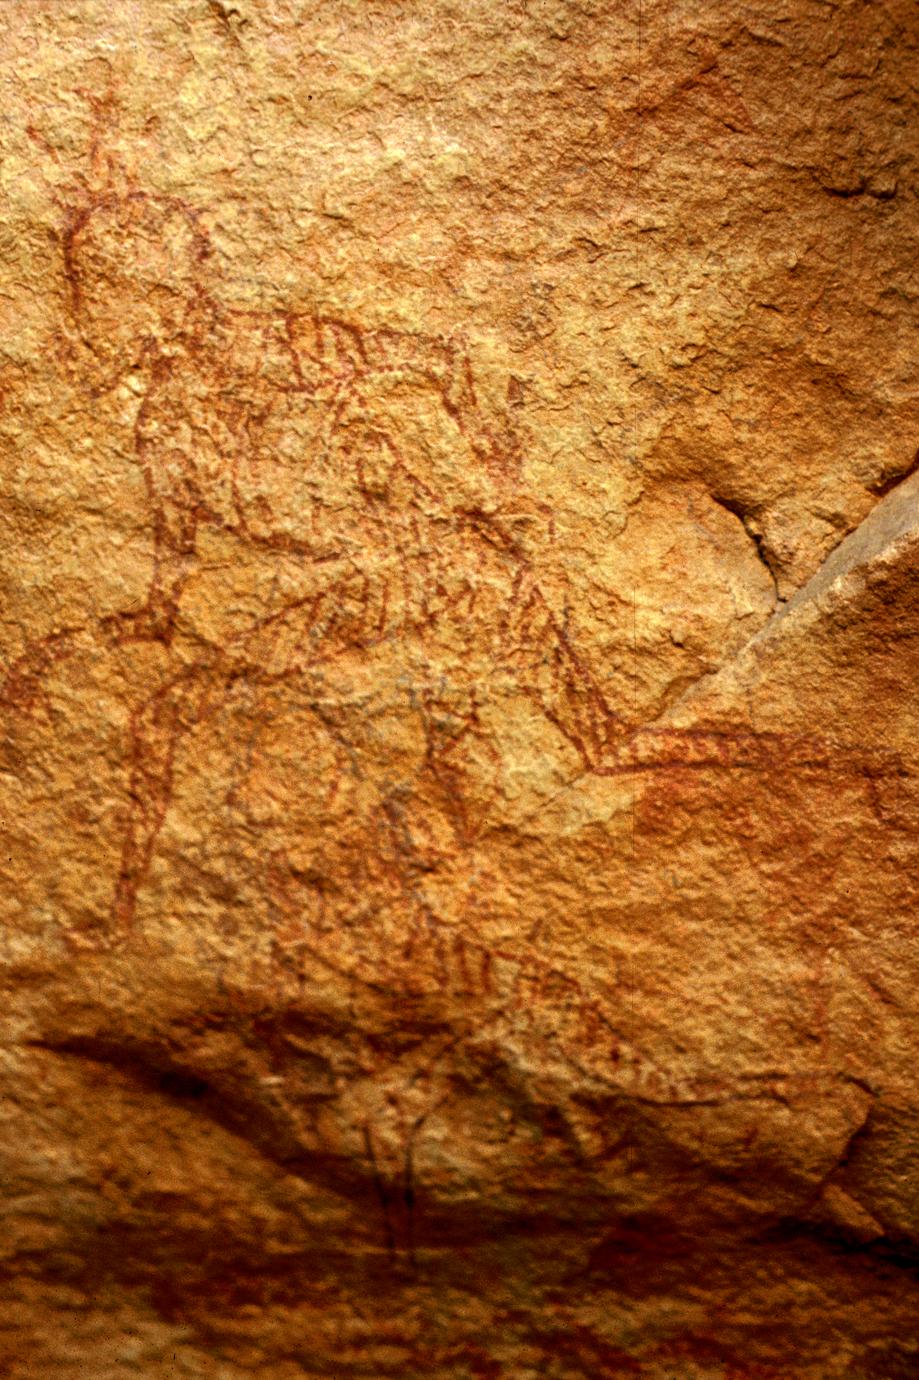 Petroglyph : Figures with Body Painting